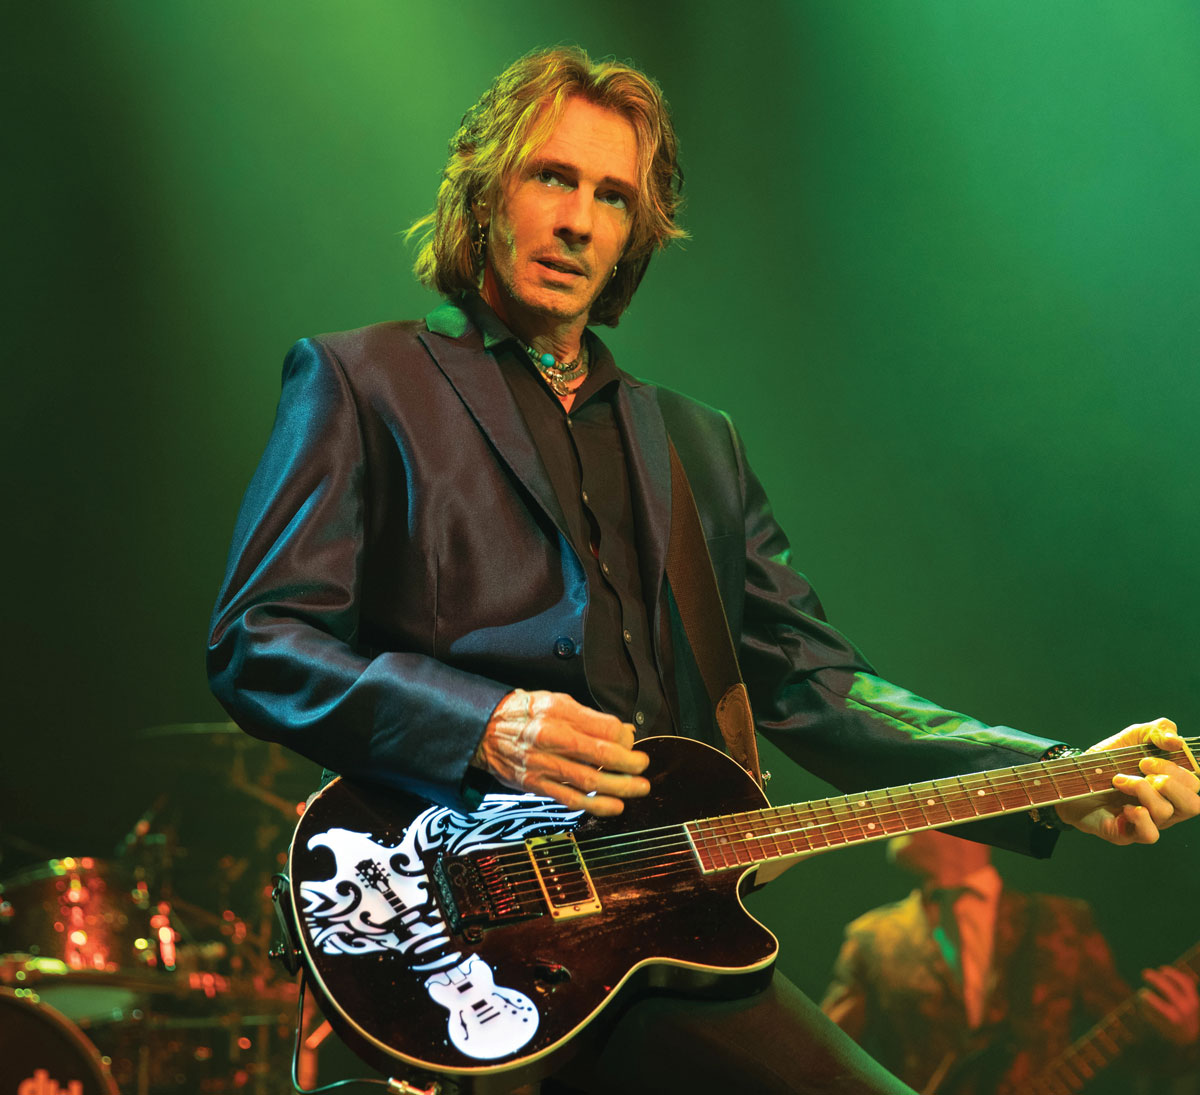 A photo of the musician Rick Springfield on stage at a concert playing electric guitar. Rick Springfield will be a performer at the 2024 Dutchess County Fair.